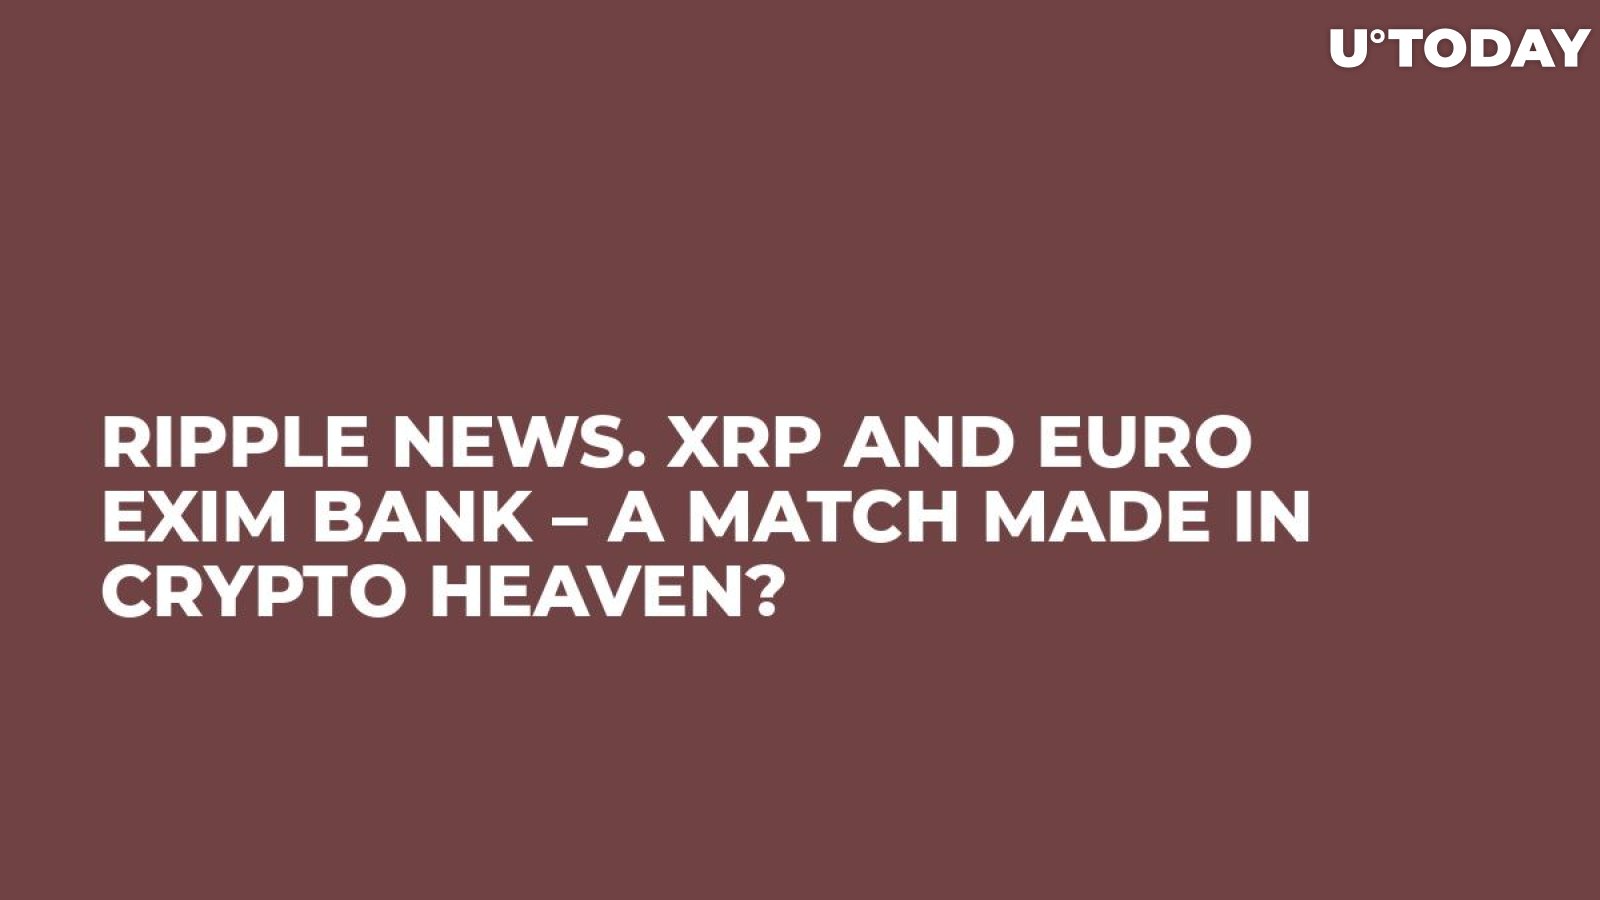 Ripple News. XRP and Euro Exim Bank – A Match Made in Crypto Heaven?